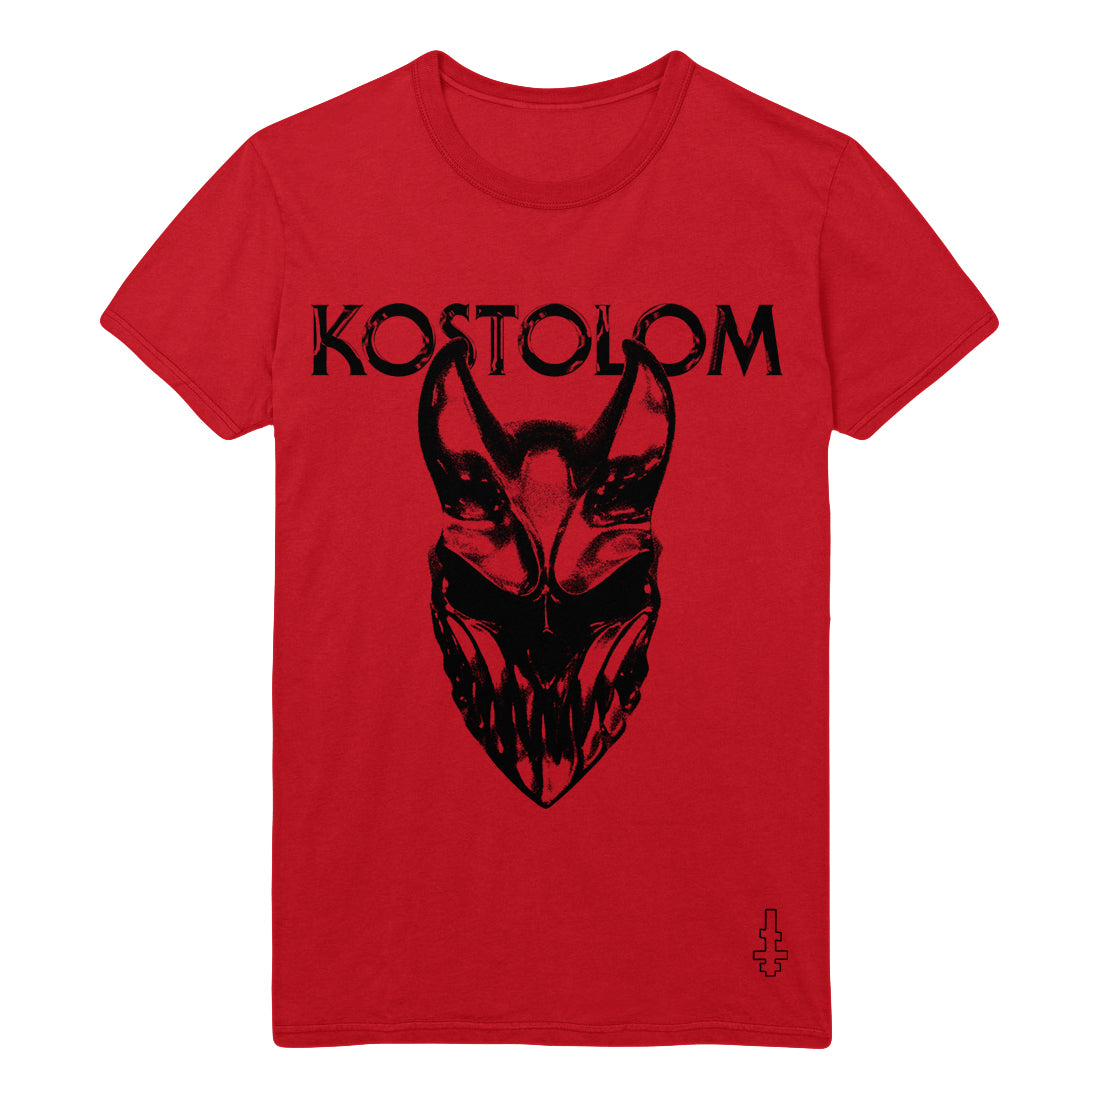 Slaughter To Prevail - 'Kostolom' Tee (Red)